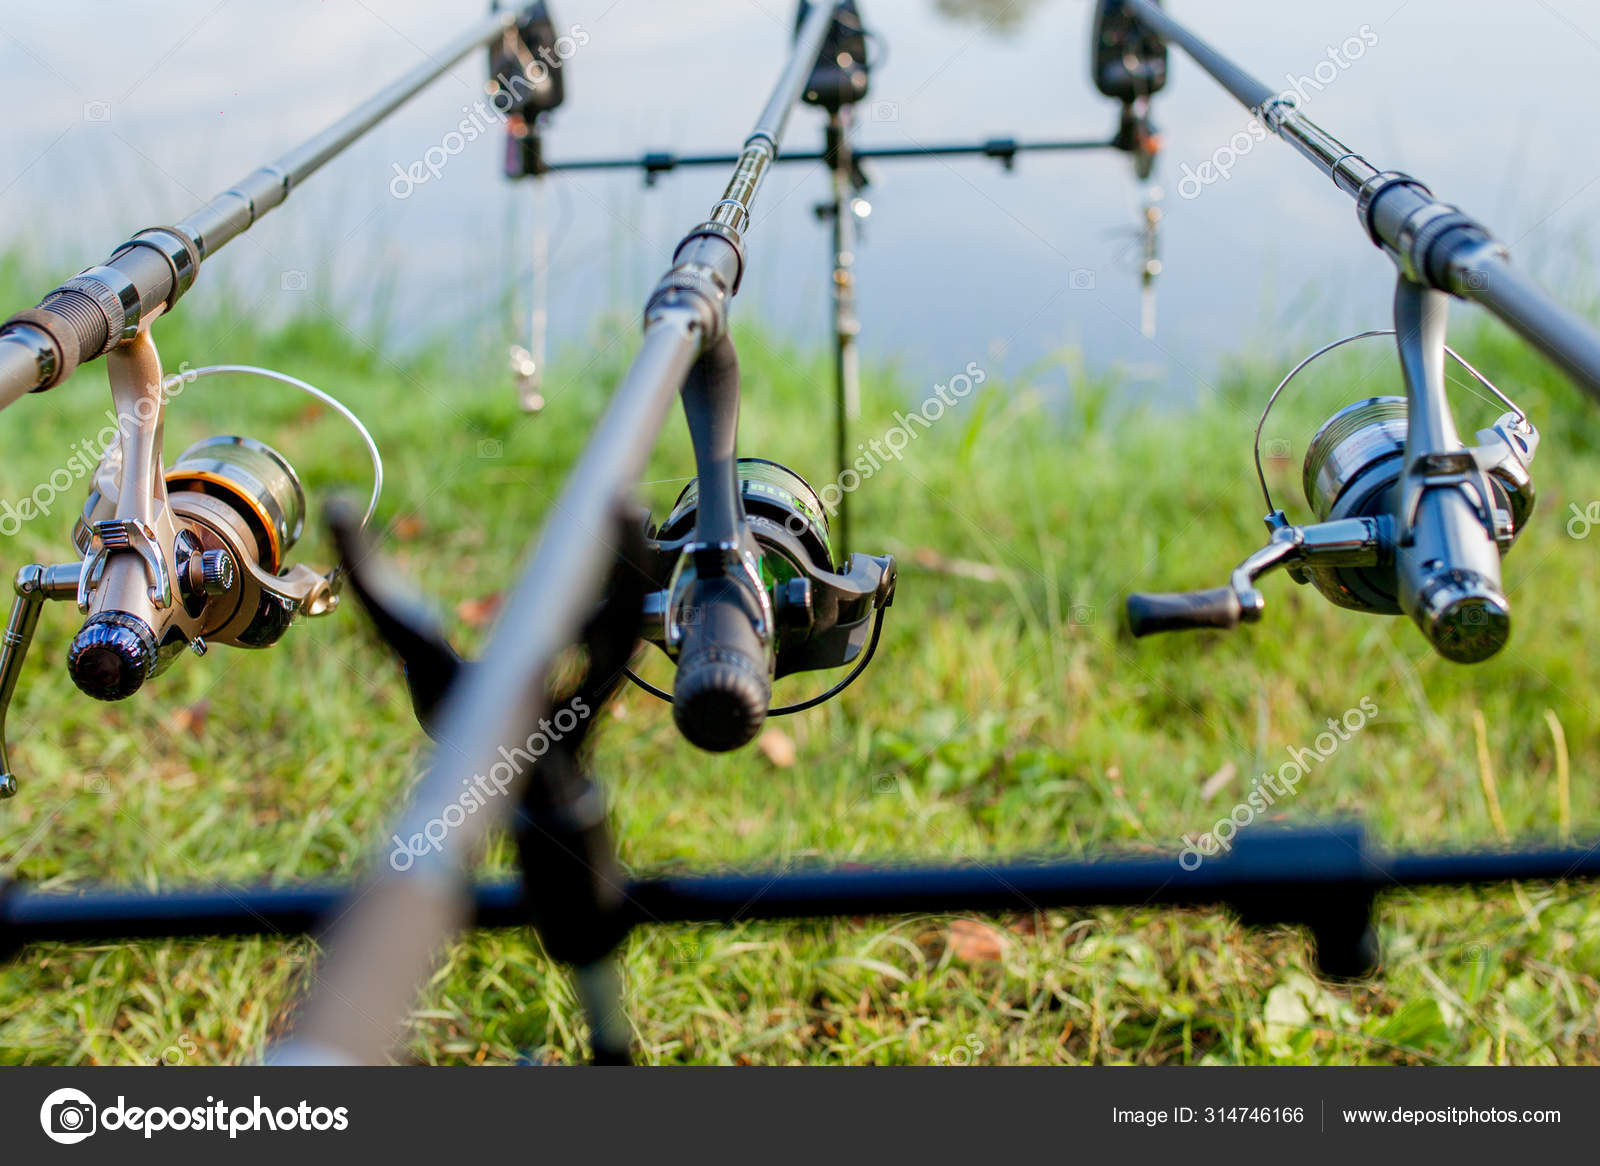 Closeup of a reel fishing rod on a prop and water background